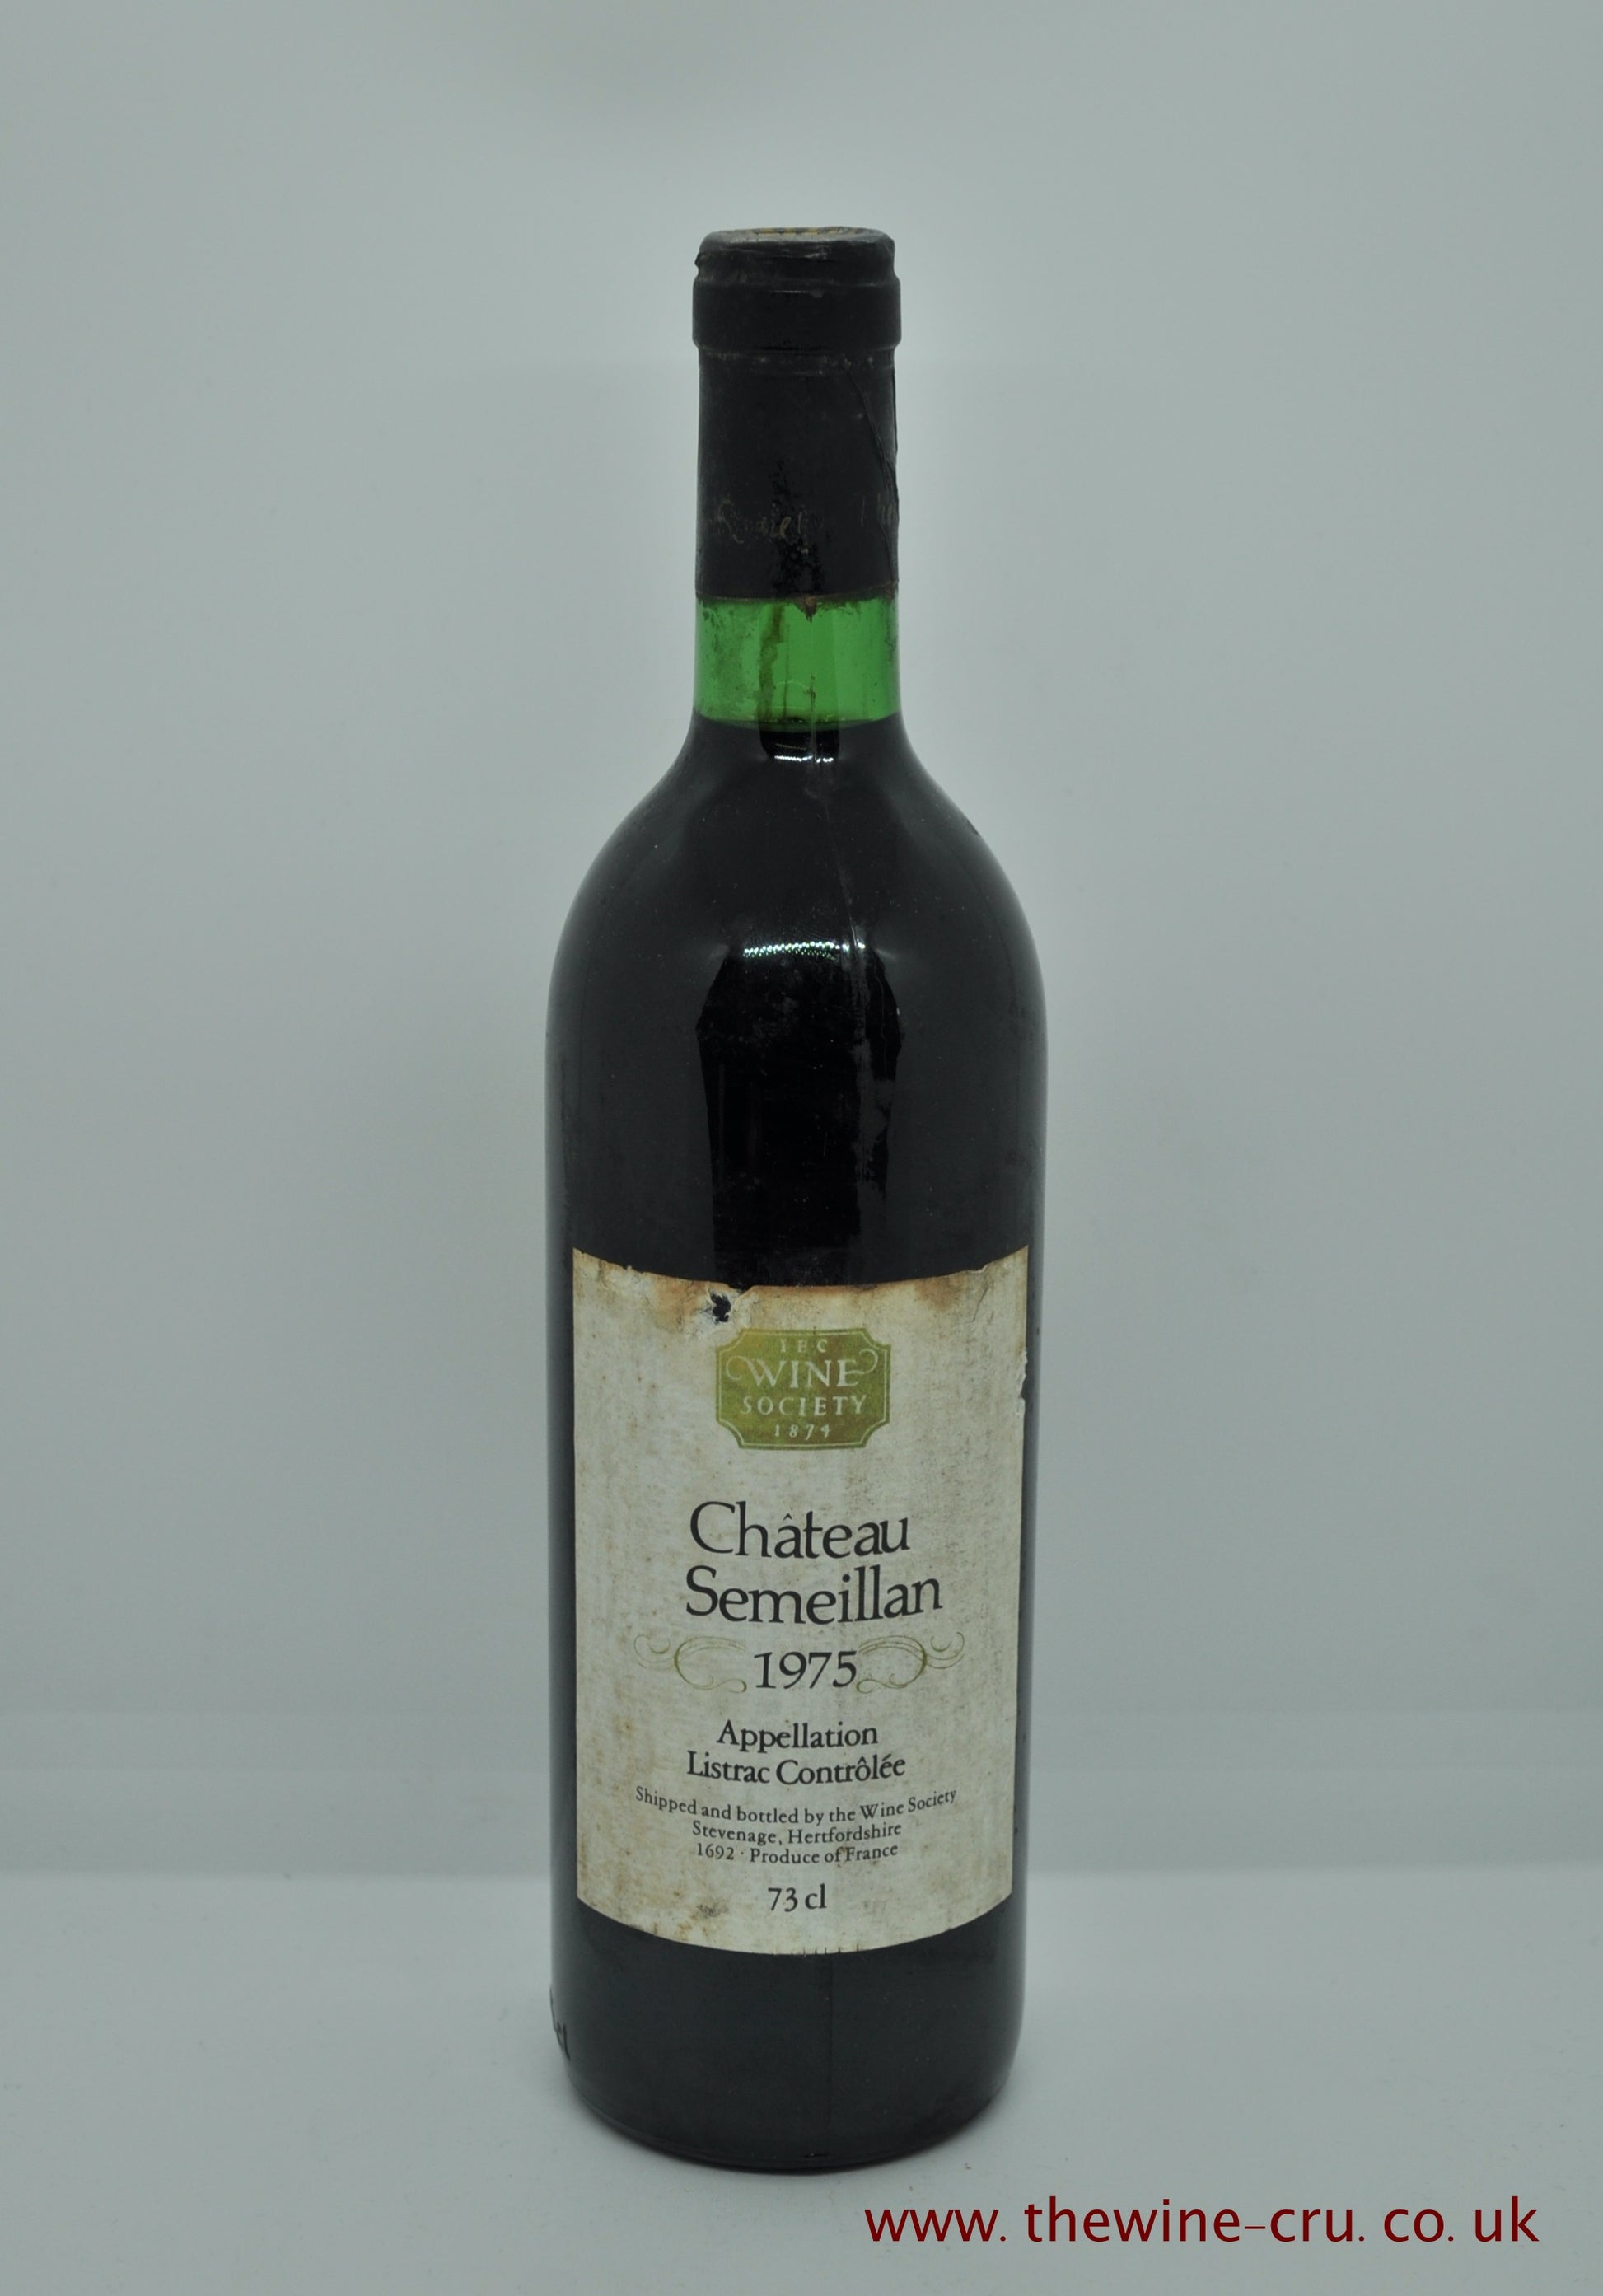 A bottle of 1975 vintage red wine from Chateau Semeillan in Listrac, Bordeaux, France. The bottle is in good condition with the wine level at the base of the neck. Immediate delivery. Free local delivery. Gift wrapping available.